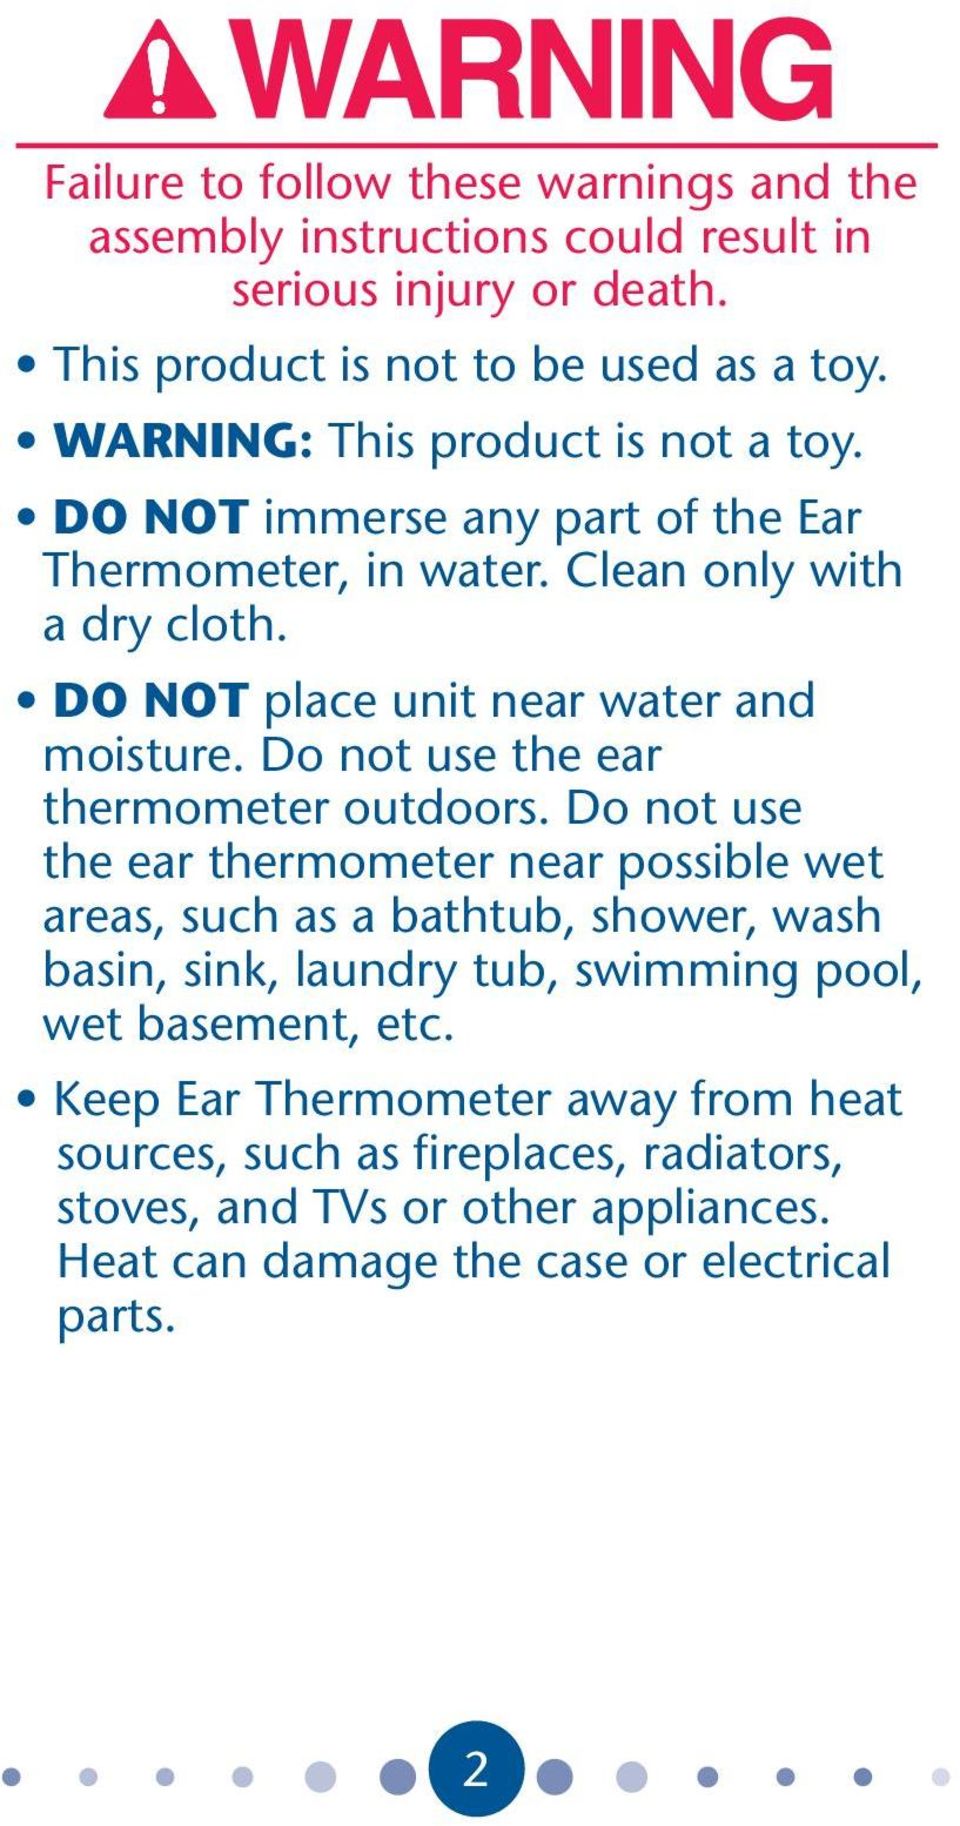 Do not use the ear thermometer outdoors.